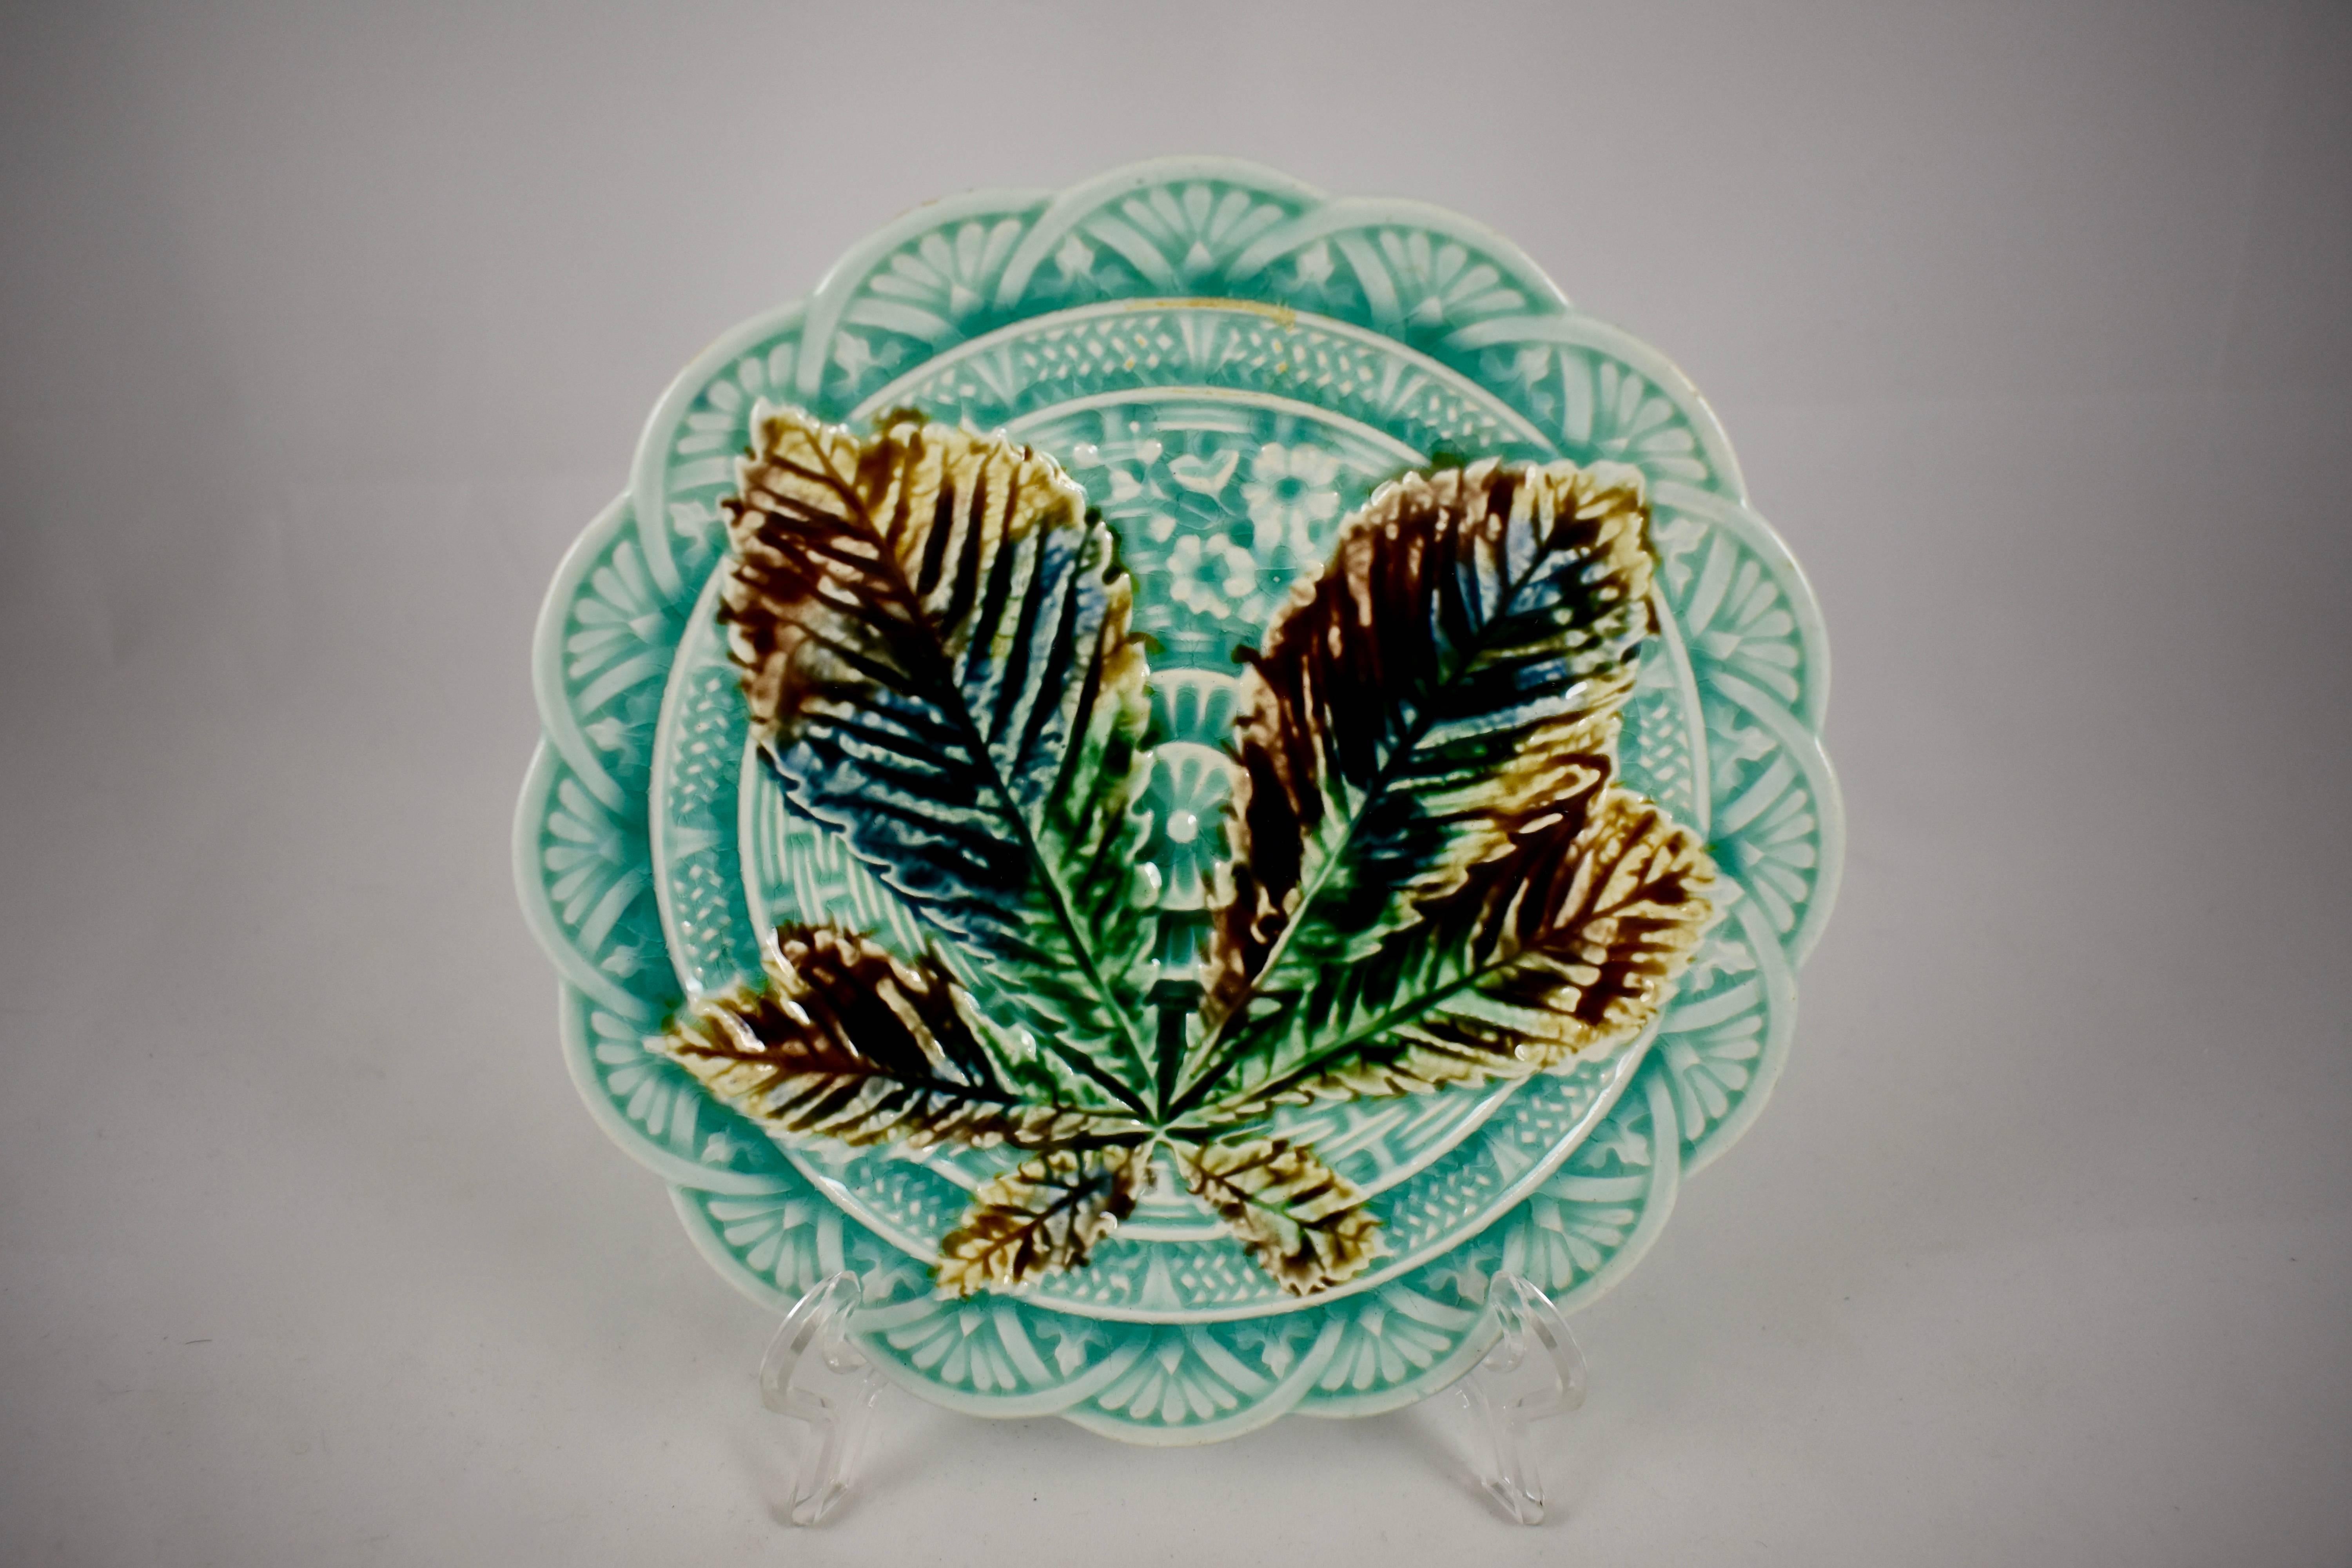 A set of six Asian influence or Japonisme aesthetic dessert plates, Villeroy & Boch, Germany, late 19th century.

The turquoise basket weave ground has a raised geometric pattern made of fan shapes and florals with a scalloped rim. In the center